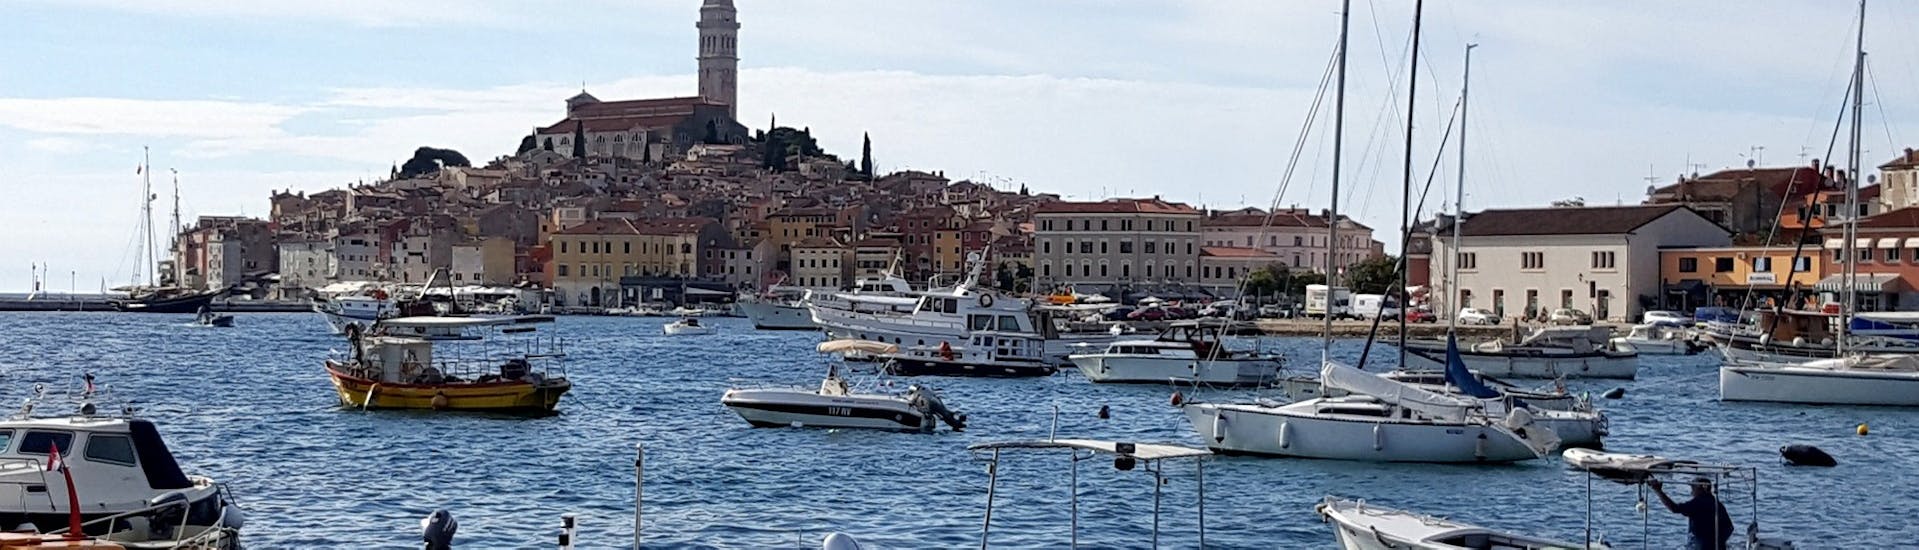 Picture of the port of Rovinj by Mare Nostrum Rovinj.